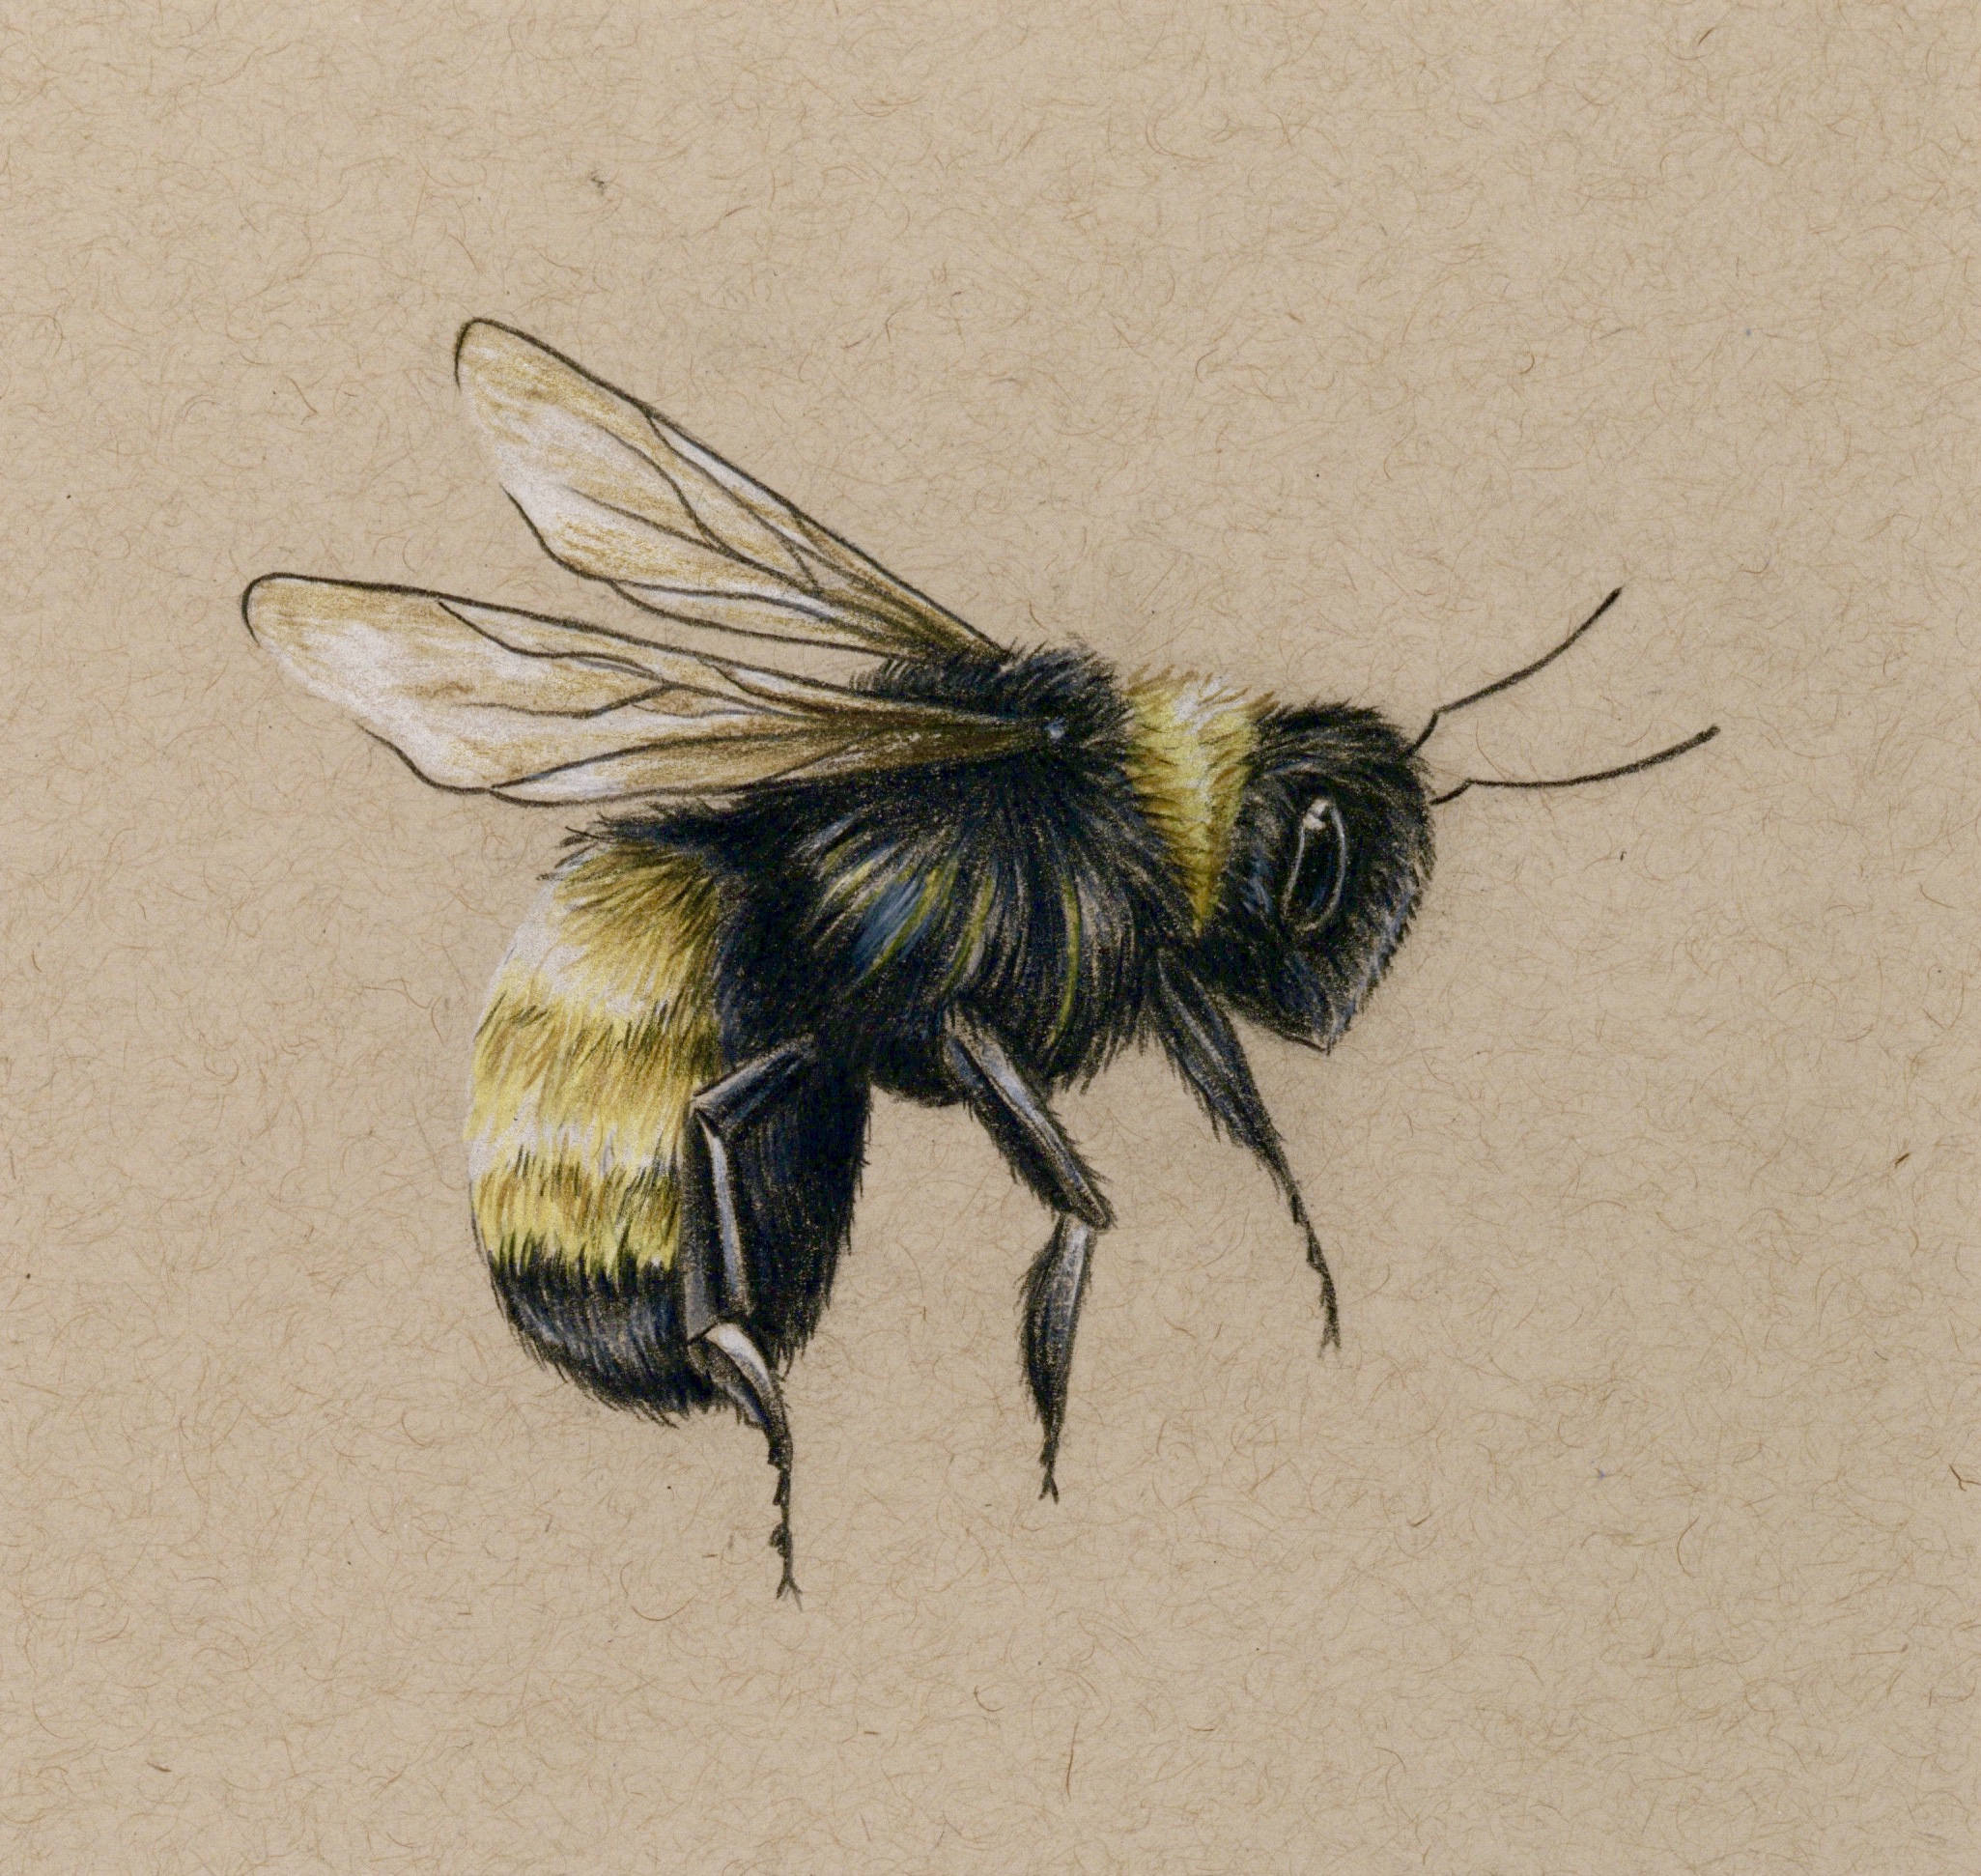 Creative Honey Bee Drawing Sketch for Kids